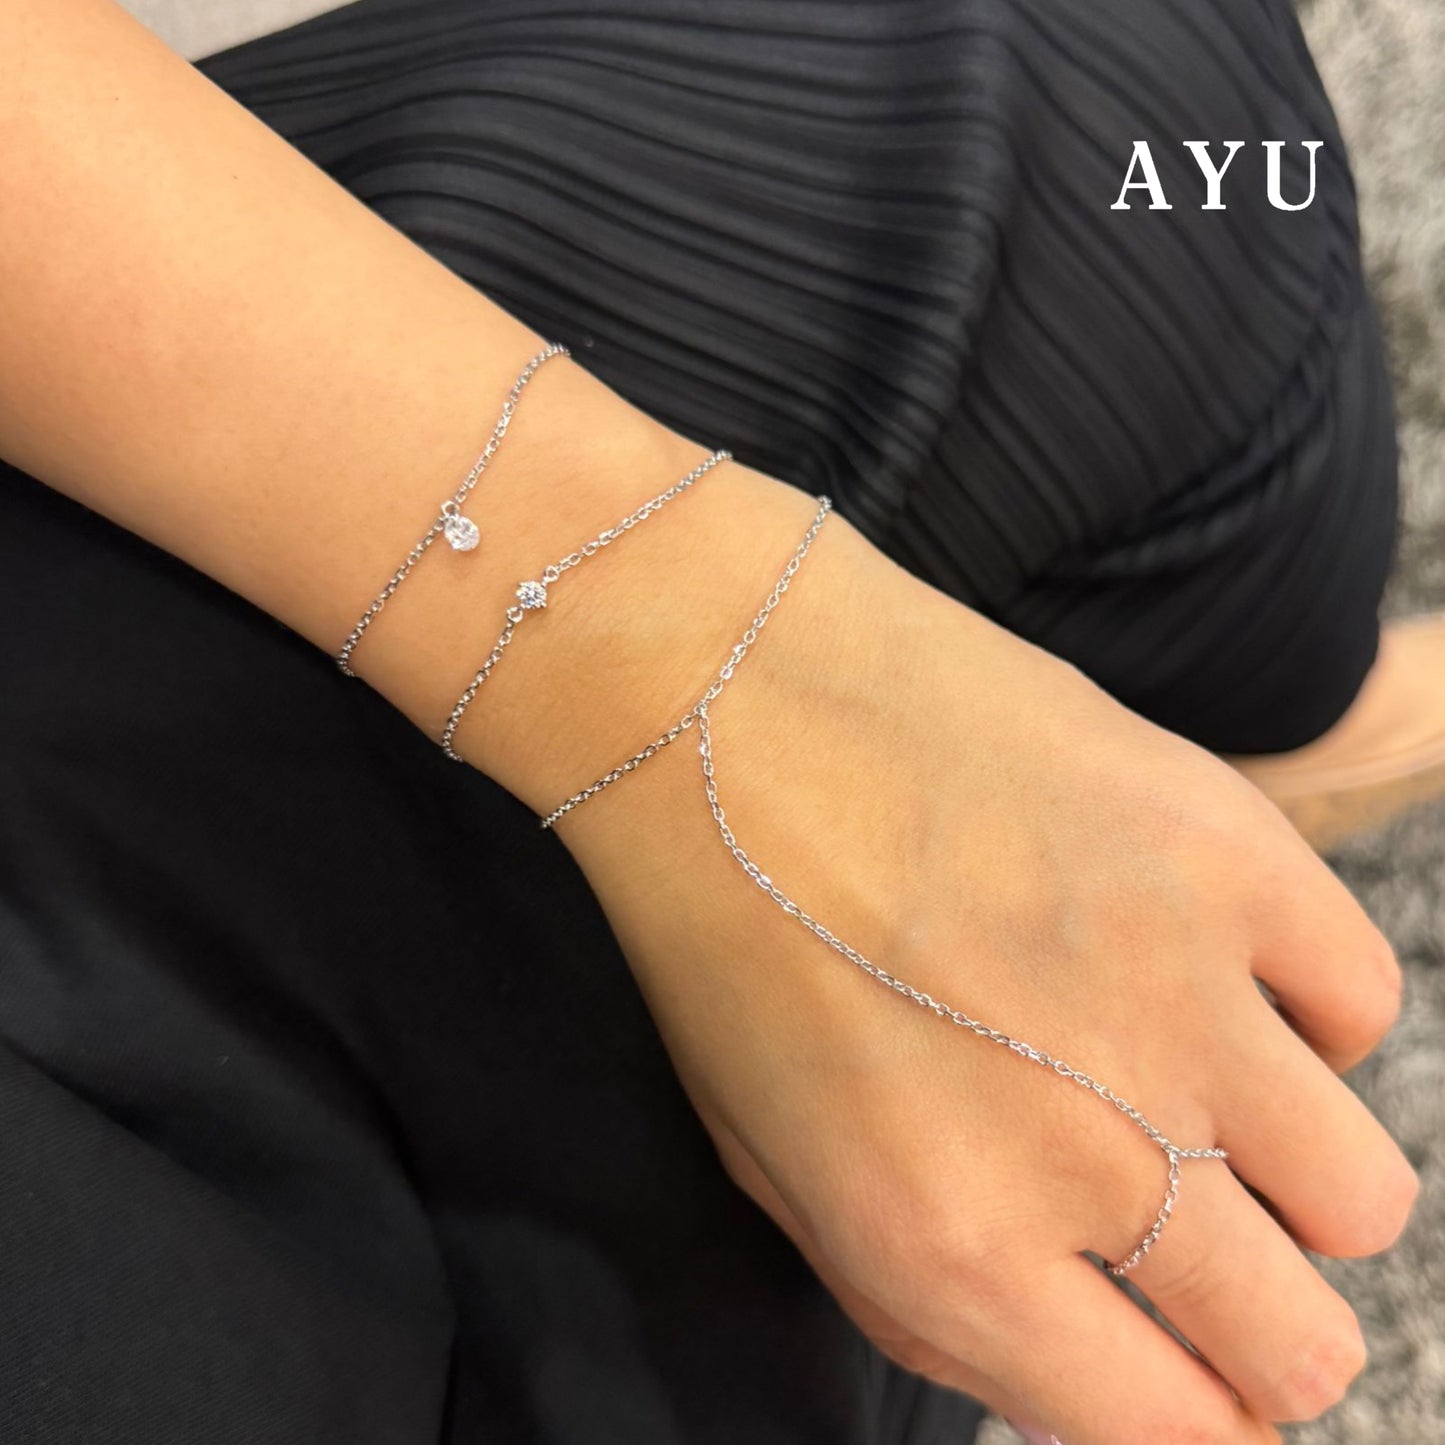 AYU Gelang Emas - Mini Solitaire Double Layer Hand Chain Bracelet 17k White Gold